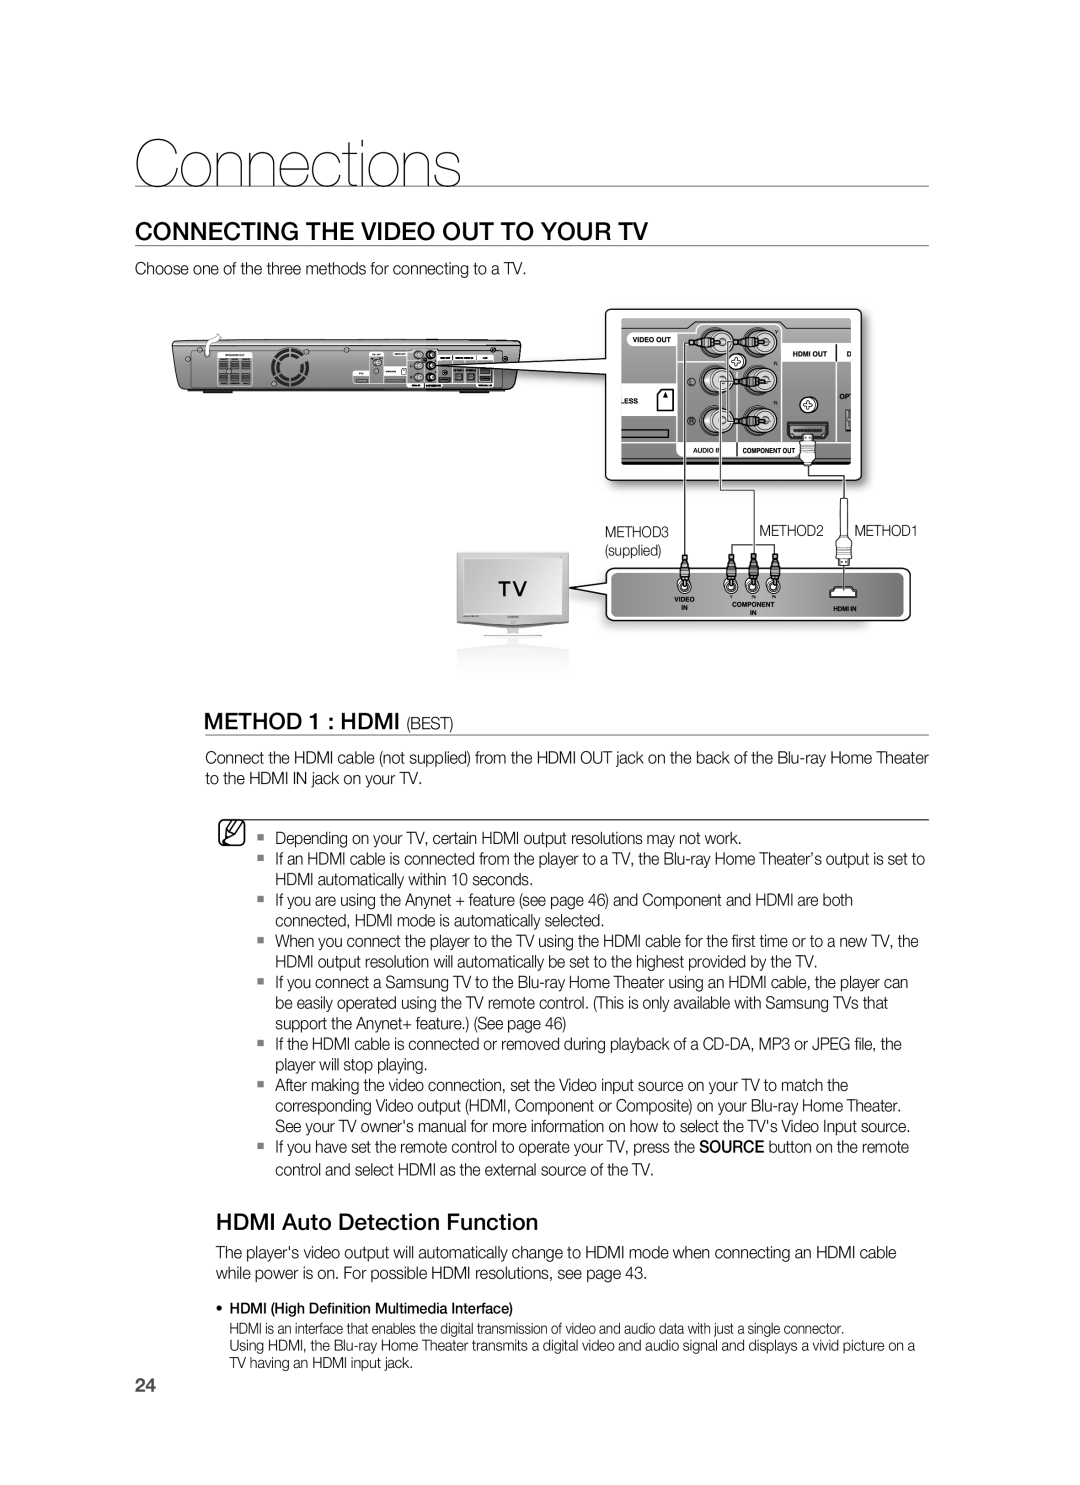 Samsung AH68-02178Z Connecting The Video Out To Your Tv, METHOD 1 HDMI BEST, HDMI Auto Detection Function, Connections 